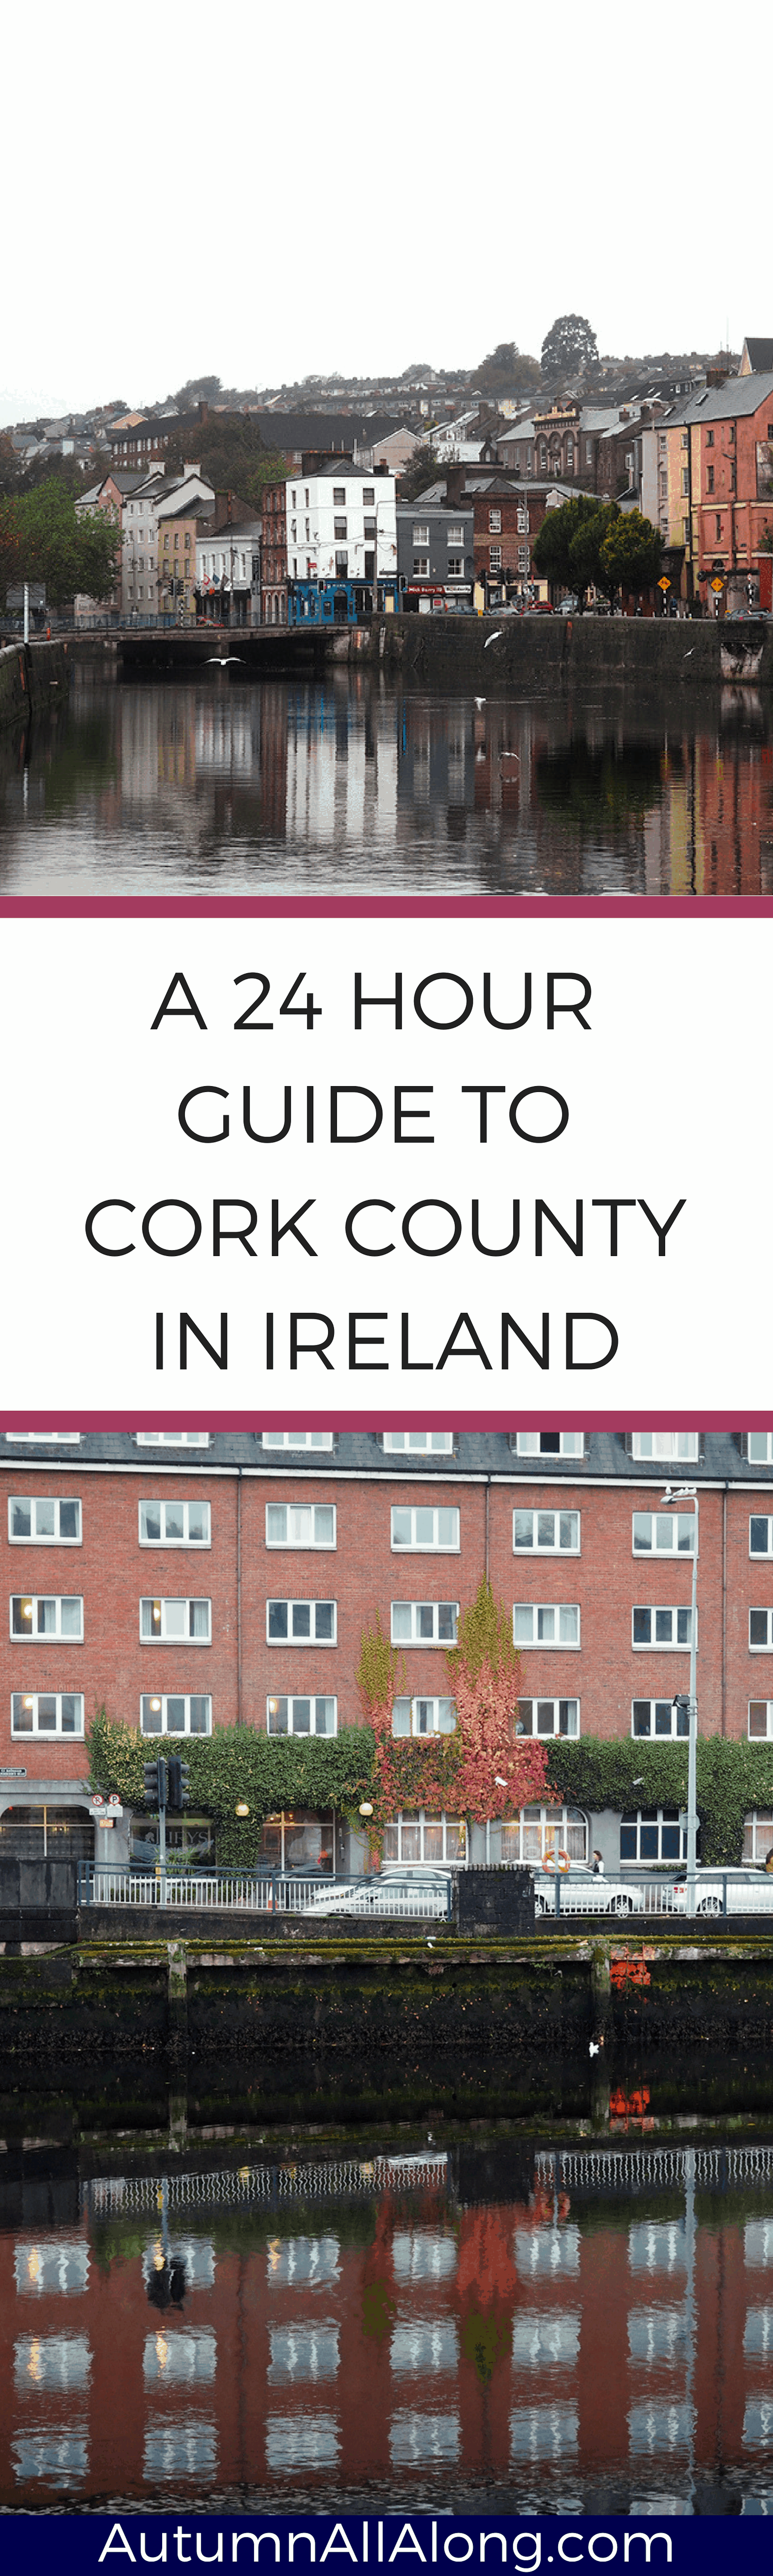 It is amazing what you can do in Cork County in 24 hours. With the hurricane, it was impressive how much we were able to do and see! | via Autumn All Along